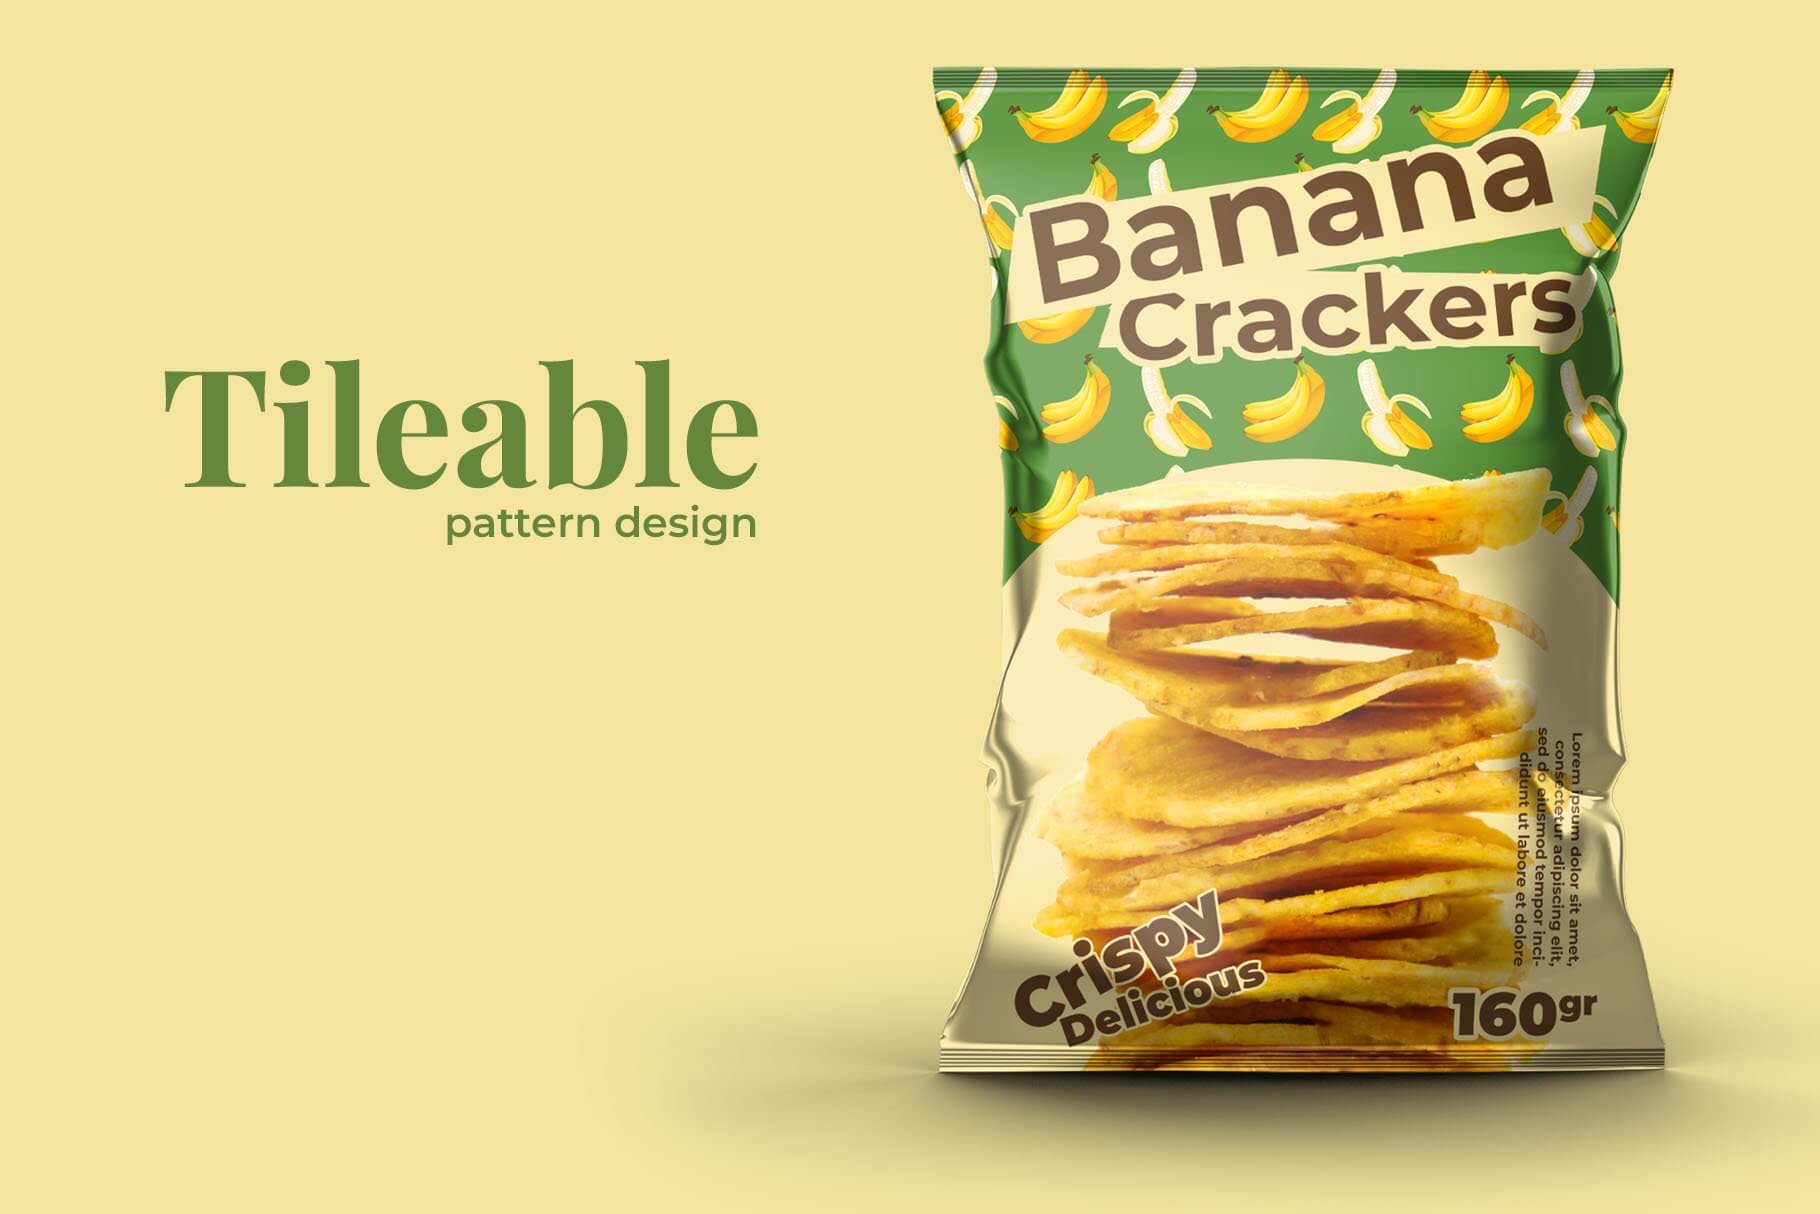 Tileable pattern design on the packet of banana crackers.